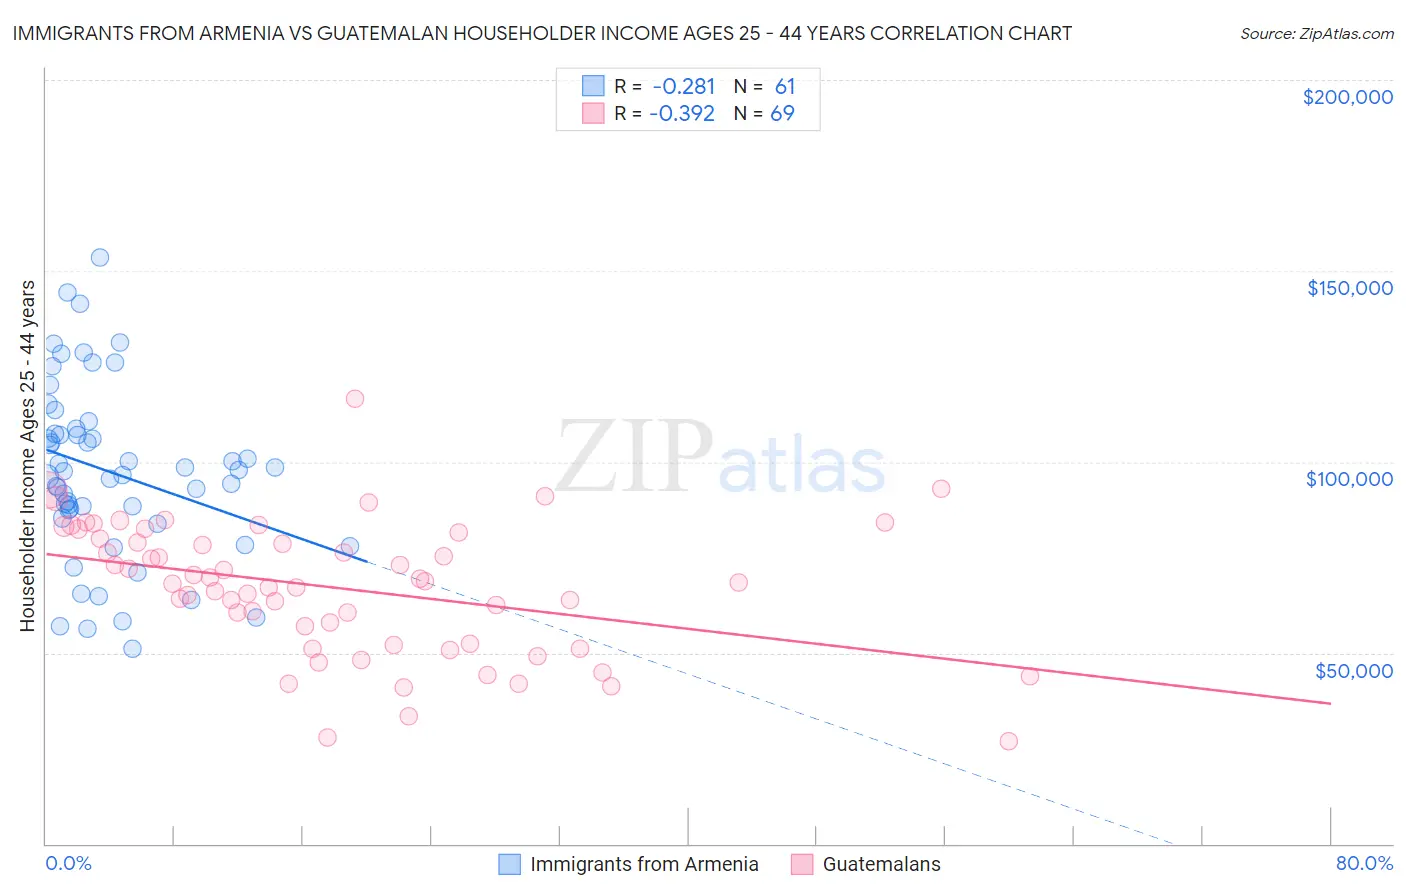 Immigrants from Armenia vs Guatemalan Householder Income Ages 25 - 44 years